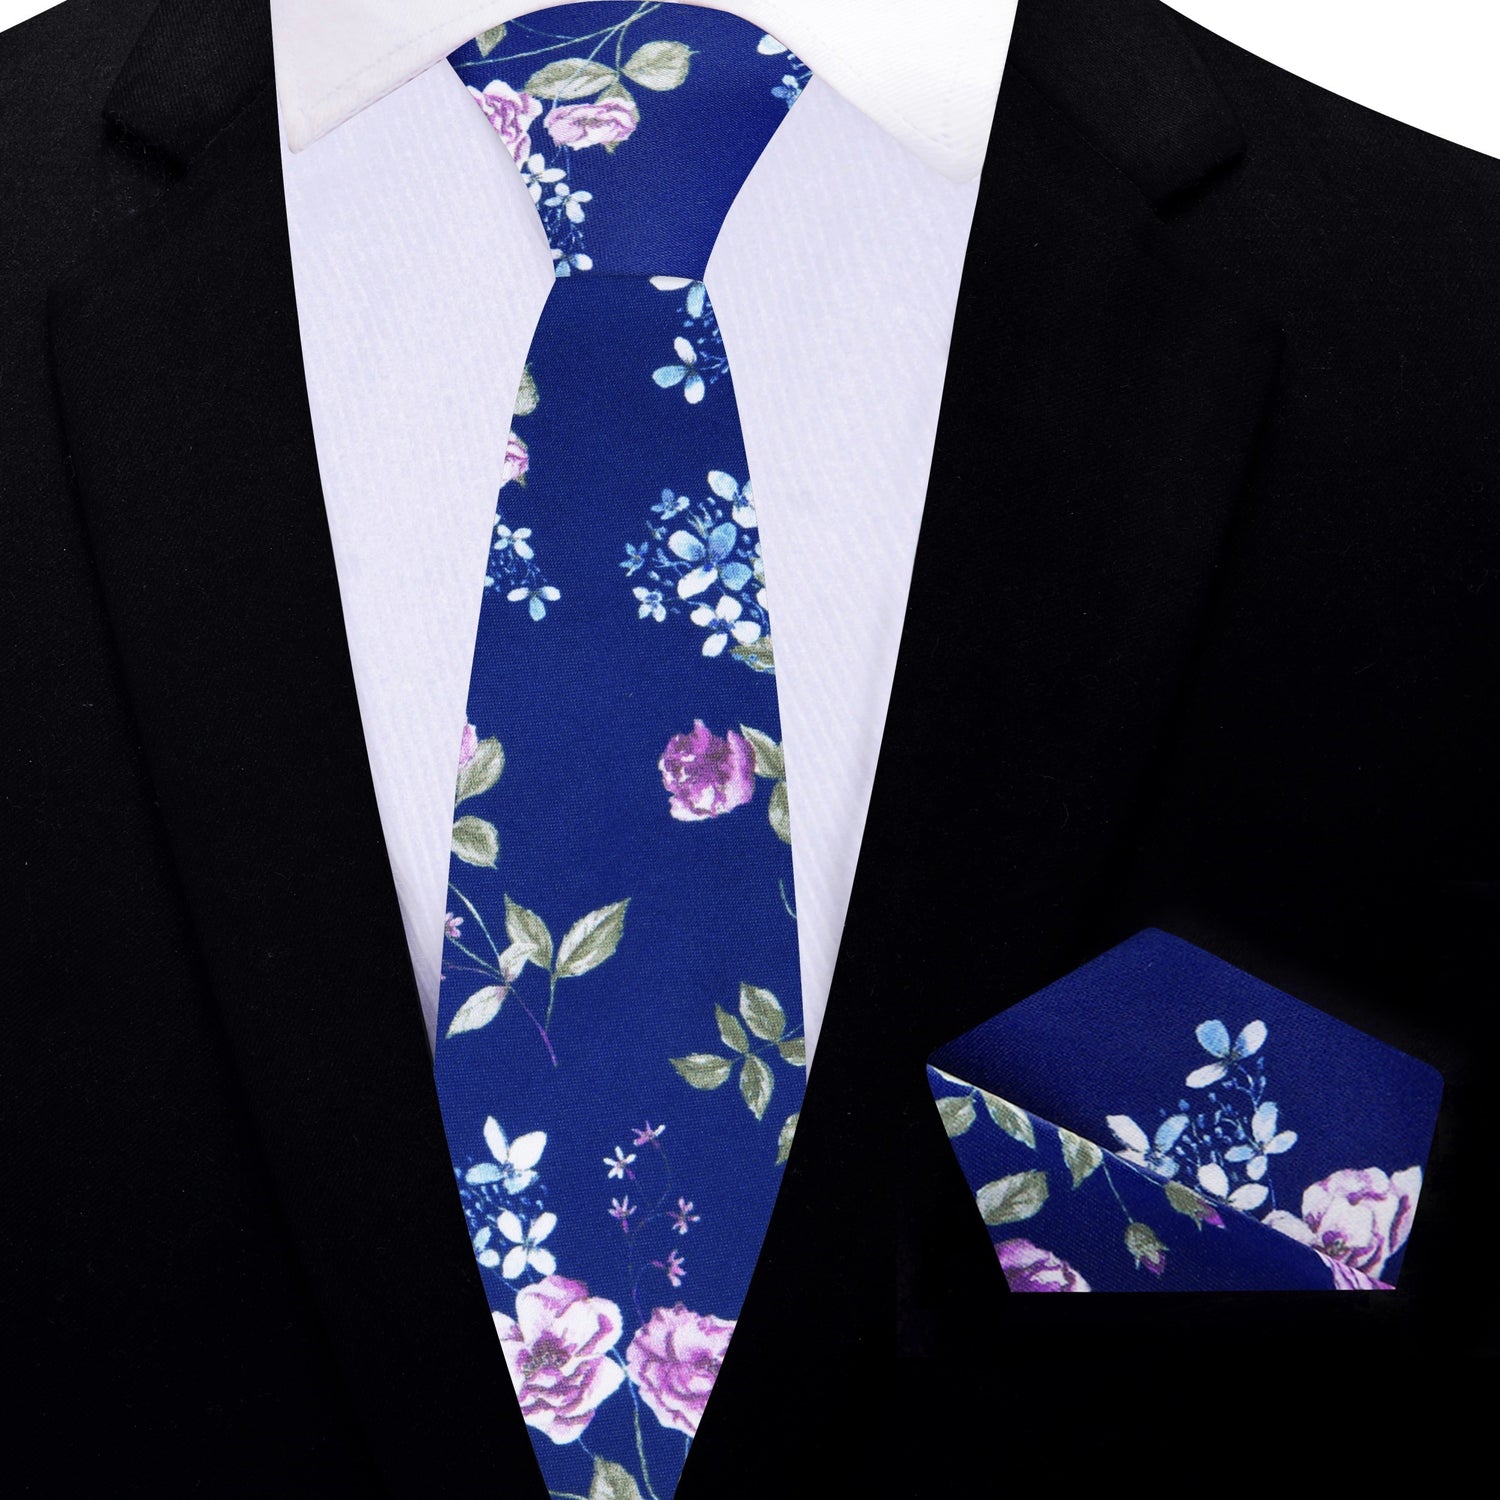 Thin Tie: Blue, Green, White Flowers Necktie and Matching Square